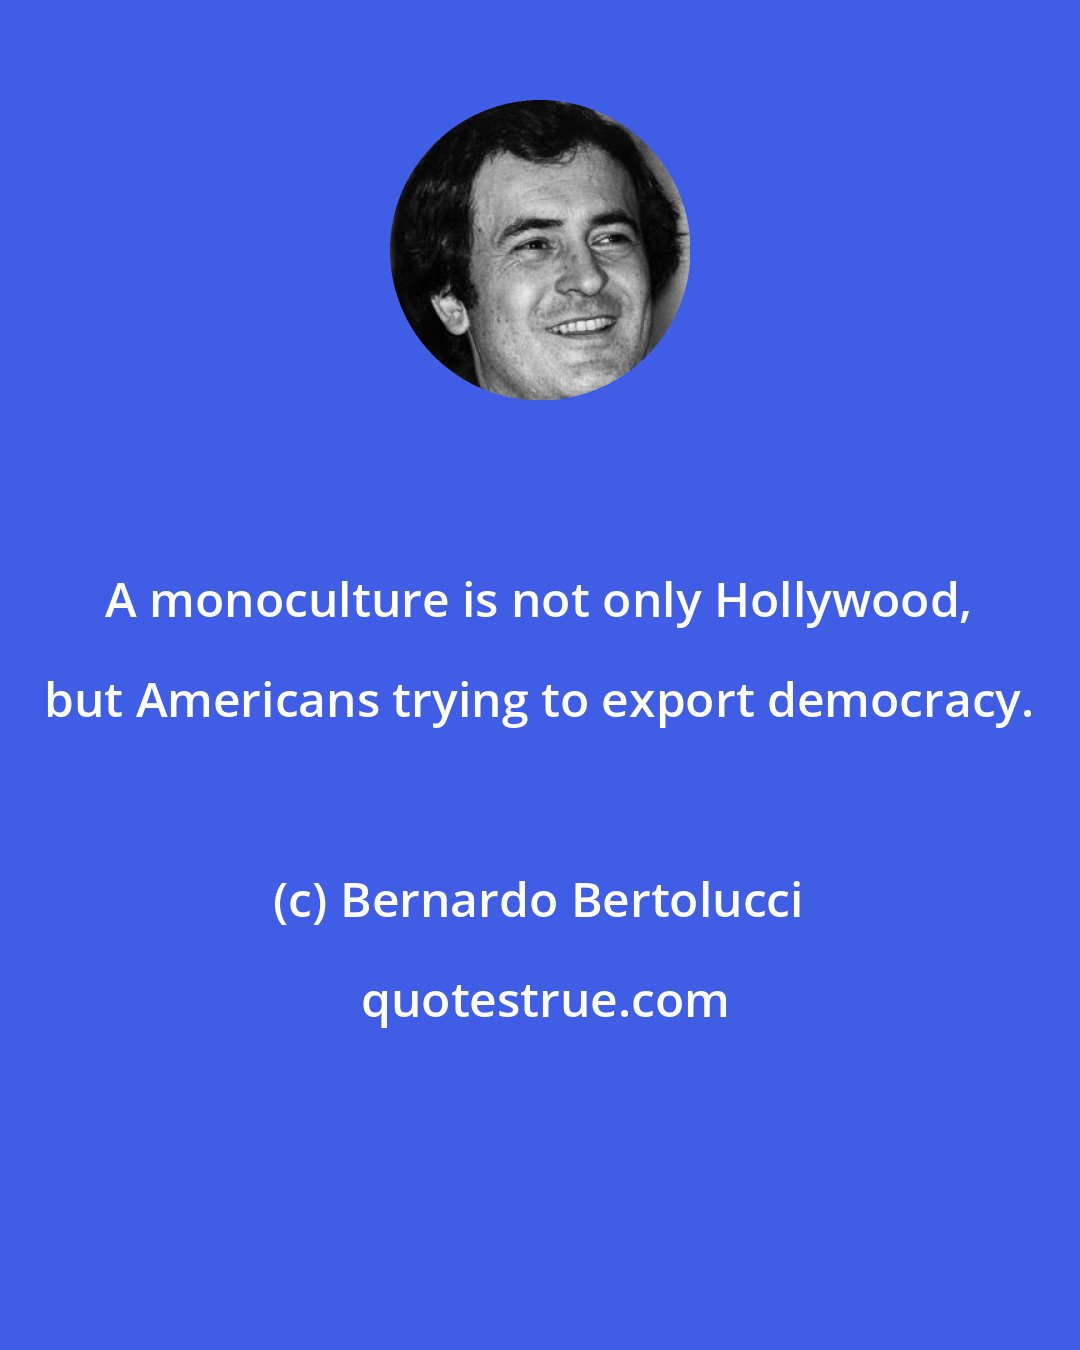 Bernardo Bertolucci: A monoculture is not only Hollywood, but Americans trying to export democracy.